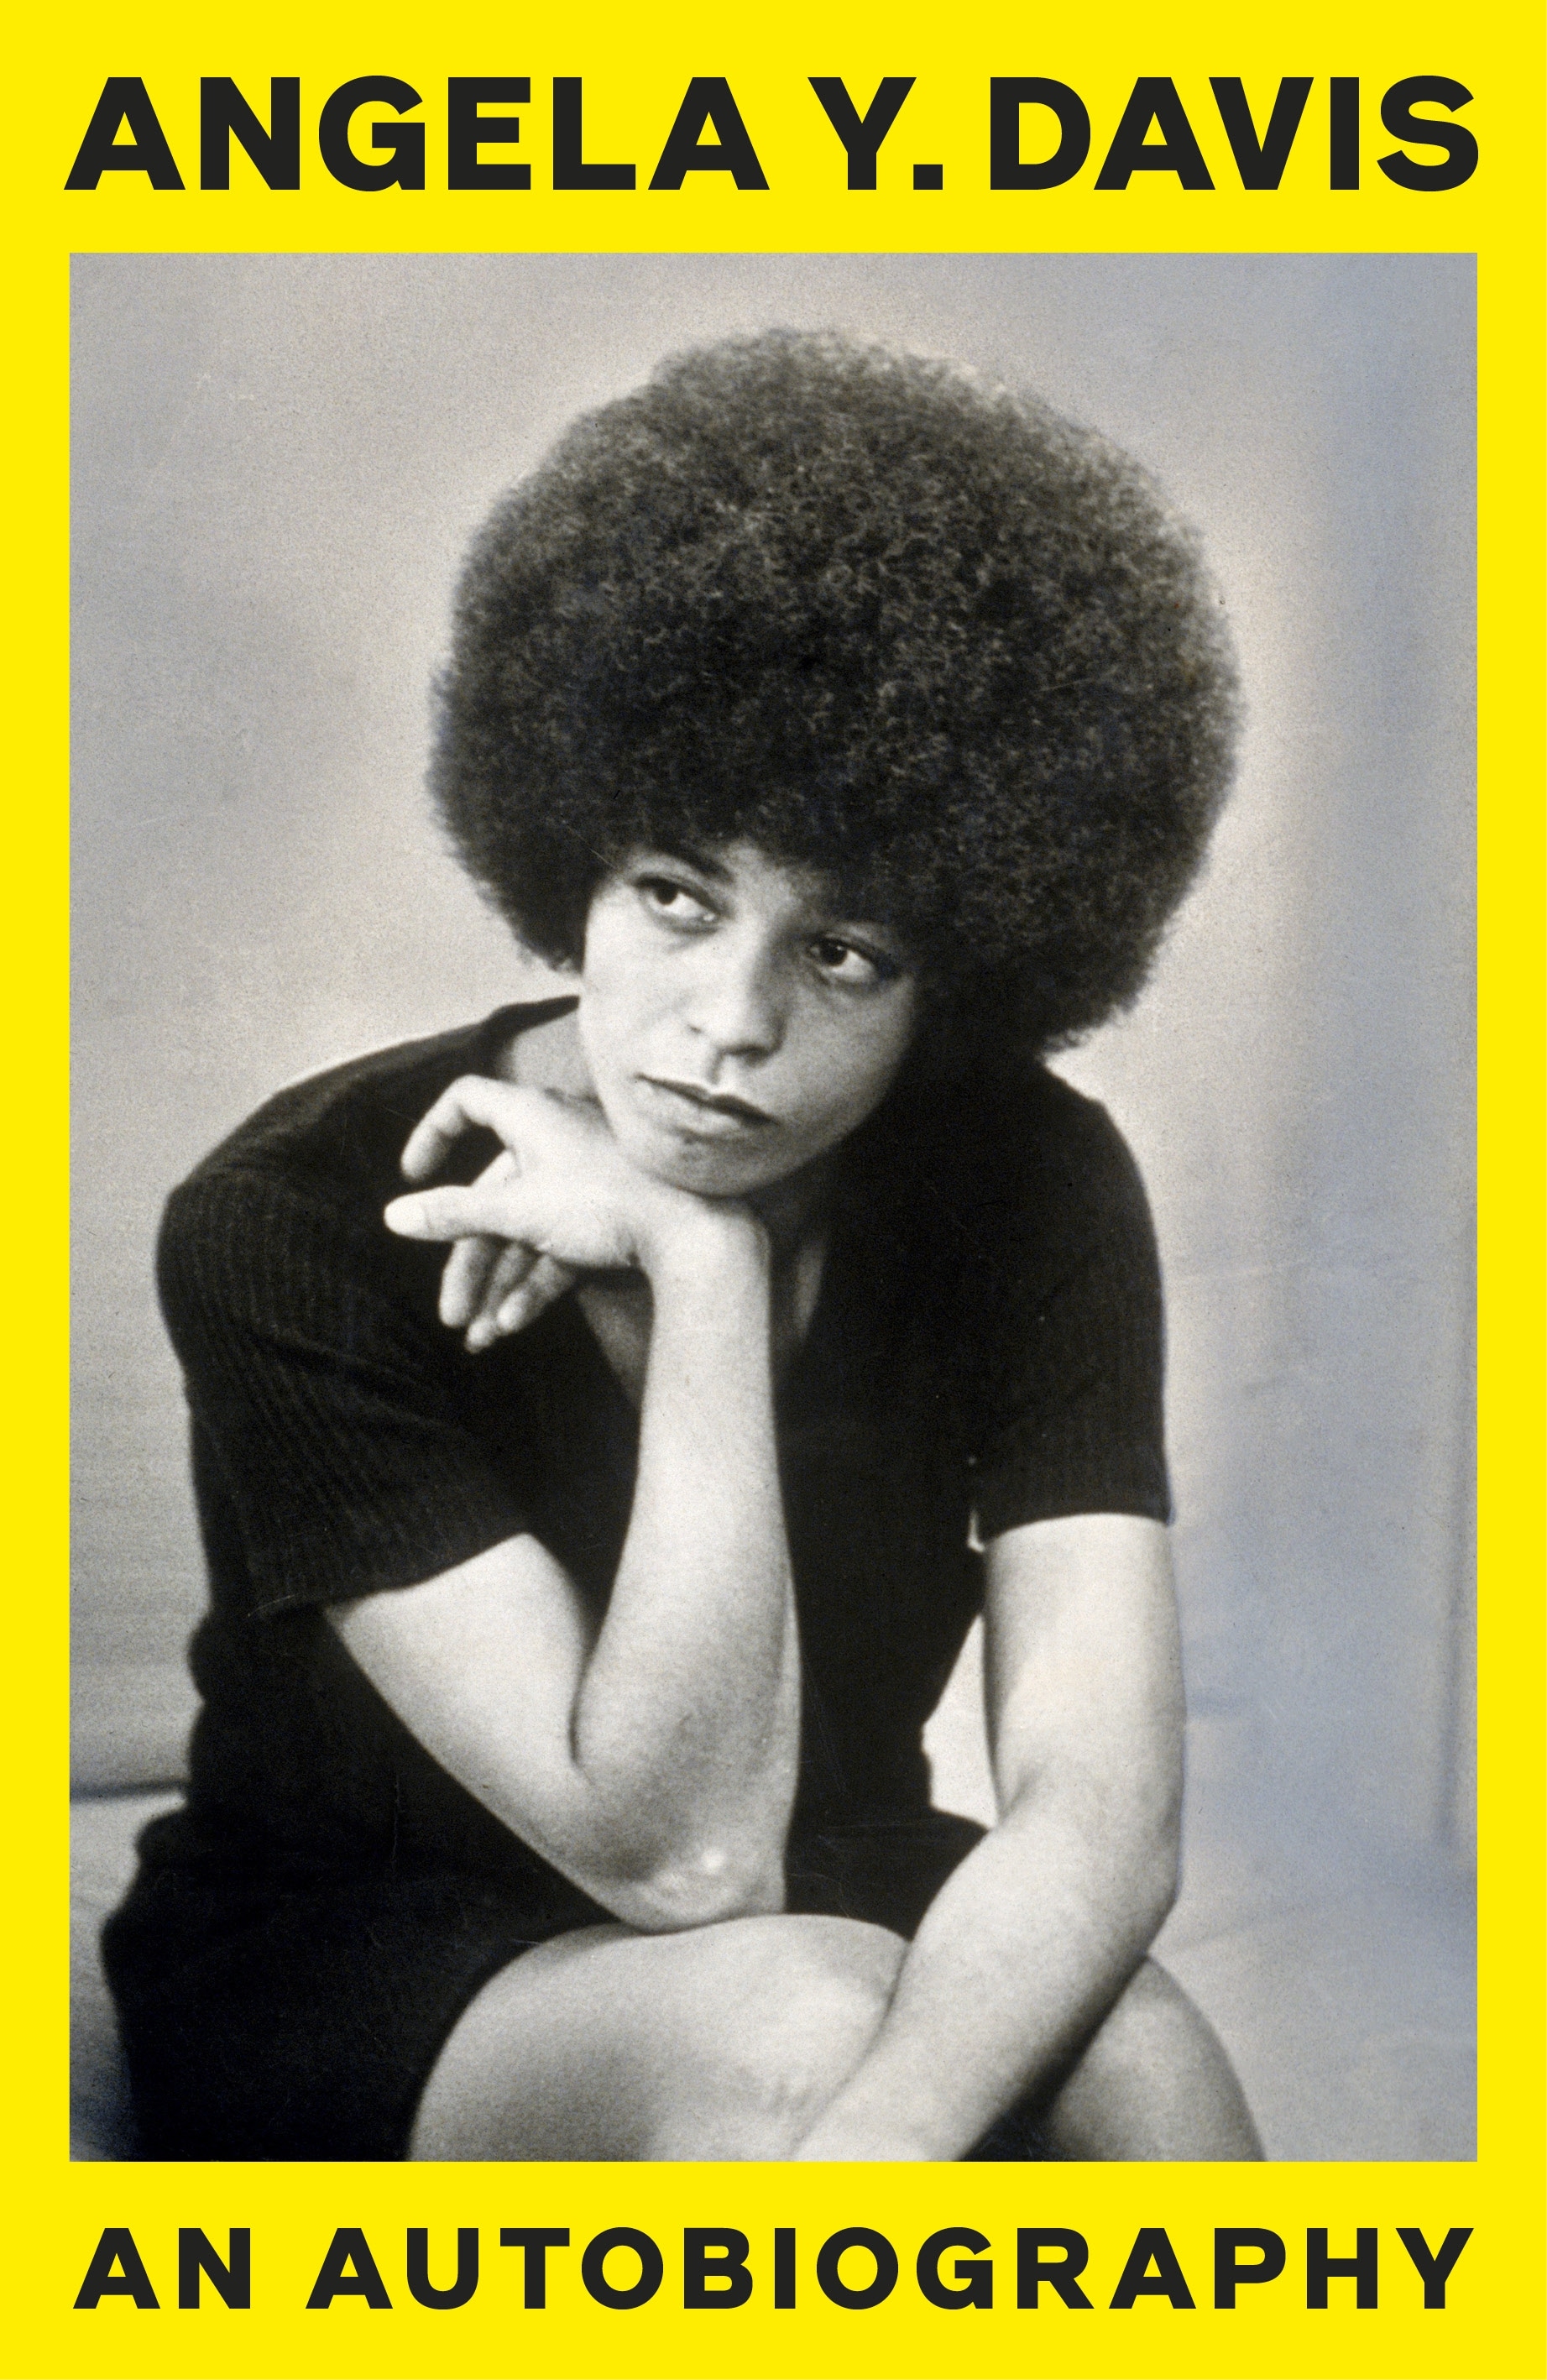 Book “An Autobiography” by Angela Y. Davis — March 10, 2022